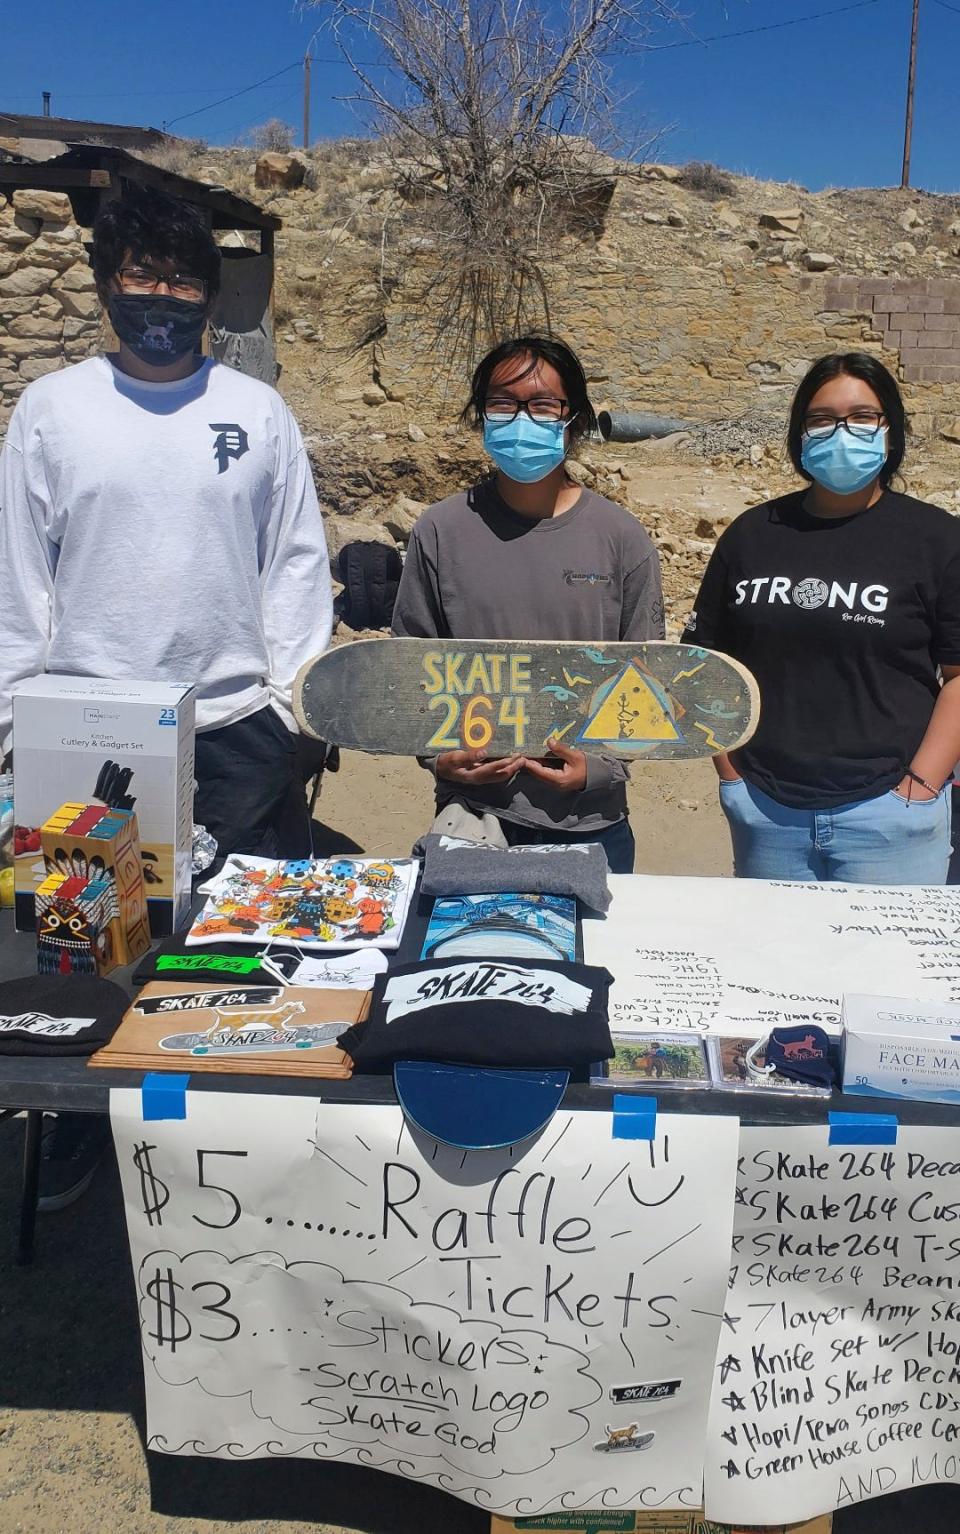 This undated photo provided by Brandon Nahsonhoya in August 2022 shows Hopi youth fundraising for a skate spot on the Hopi reservation in northeastern Arizona. A handful of Hopi youth worked together to create the skate spot that opened this spring in the Village of Tewa.